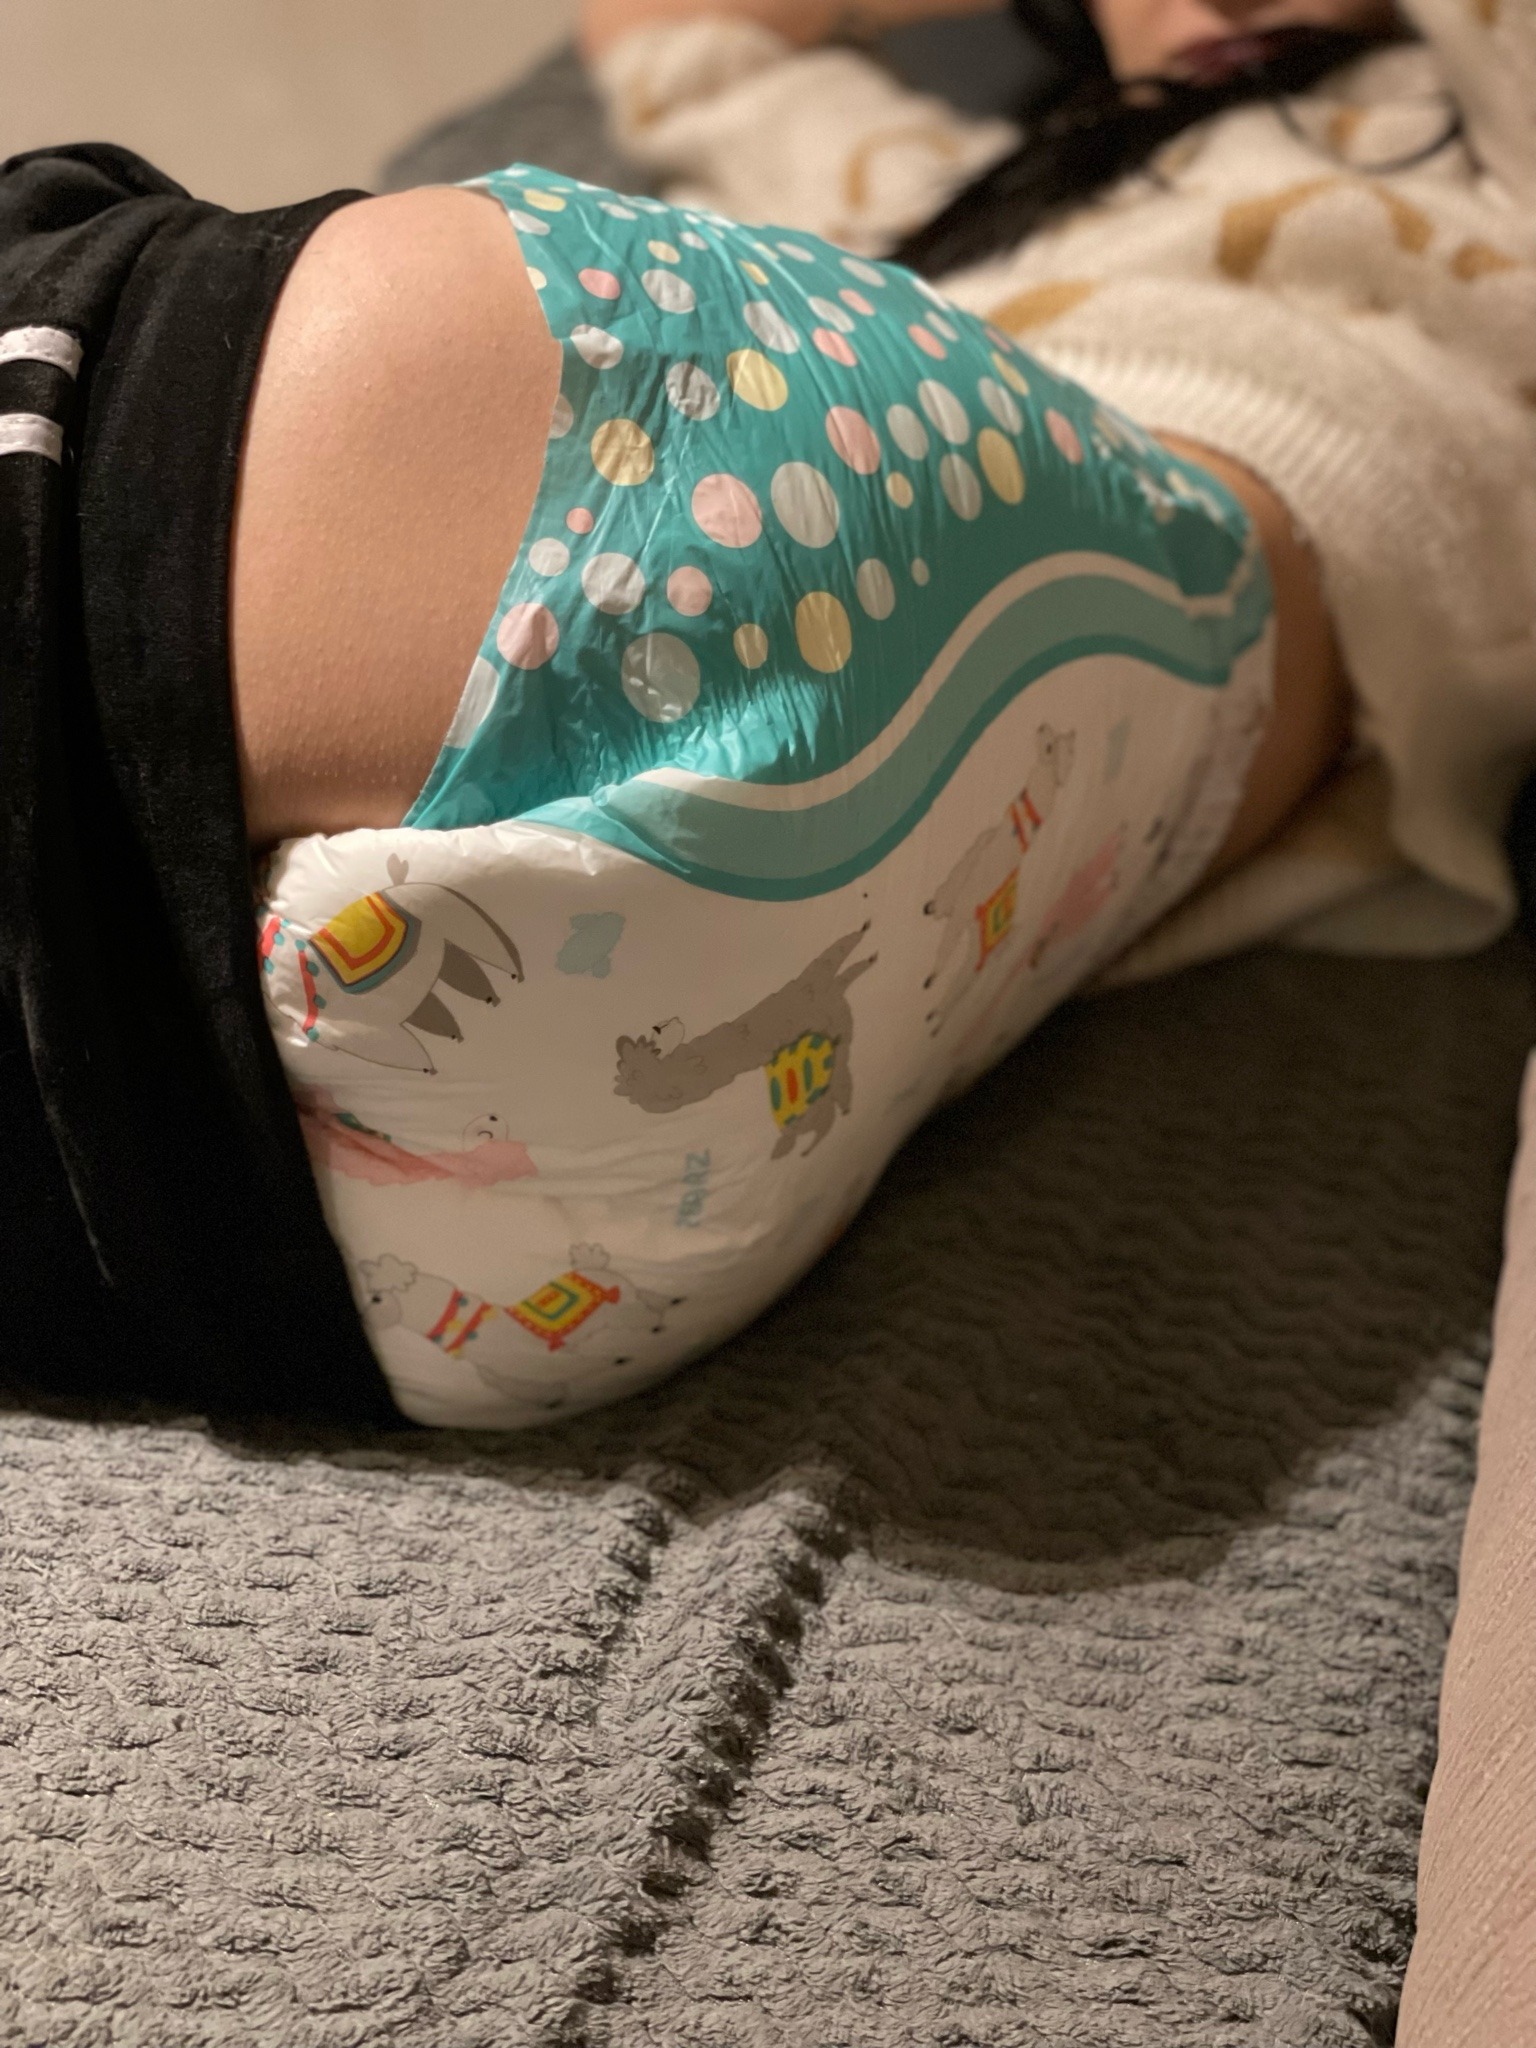 diapergirlmilla:Daddy came home from work and I had a surprise for him. 💕.He was excited 🤩 . It’s the way it should be, he told me; little girls belong in diapers!On the pinned post, we have almost 1K likes.  That means daddy is going to wear